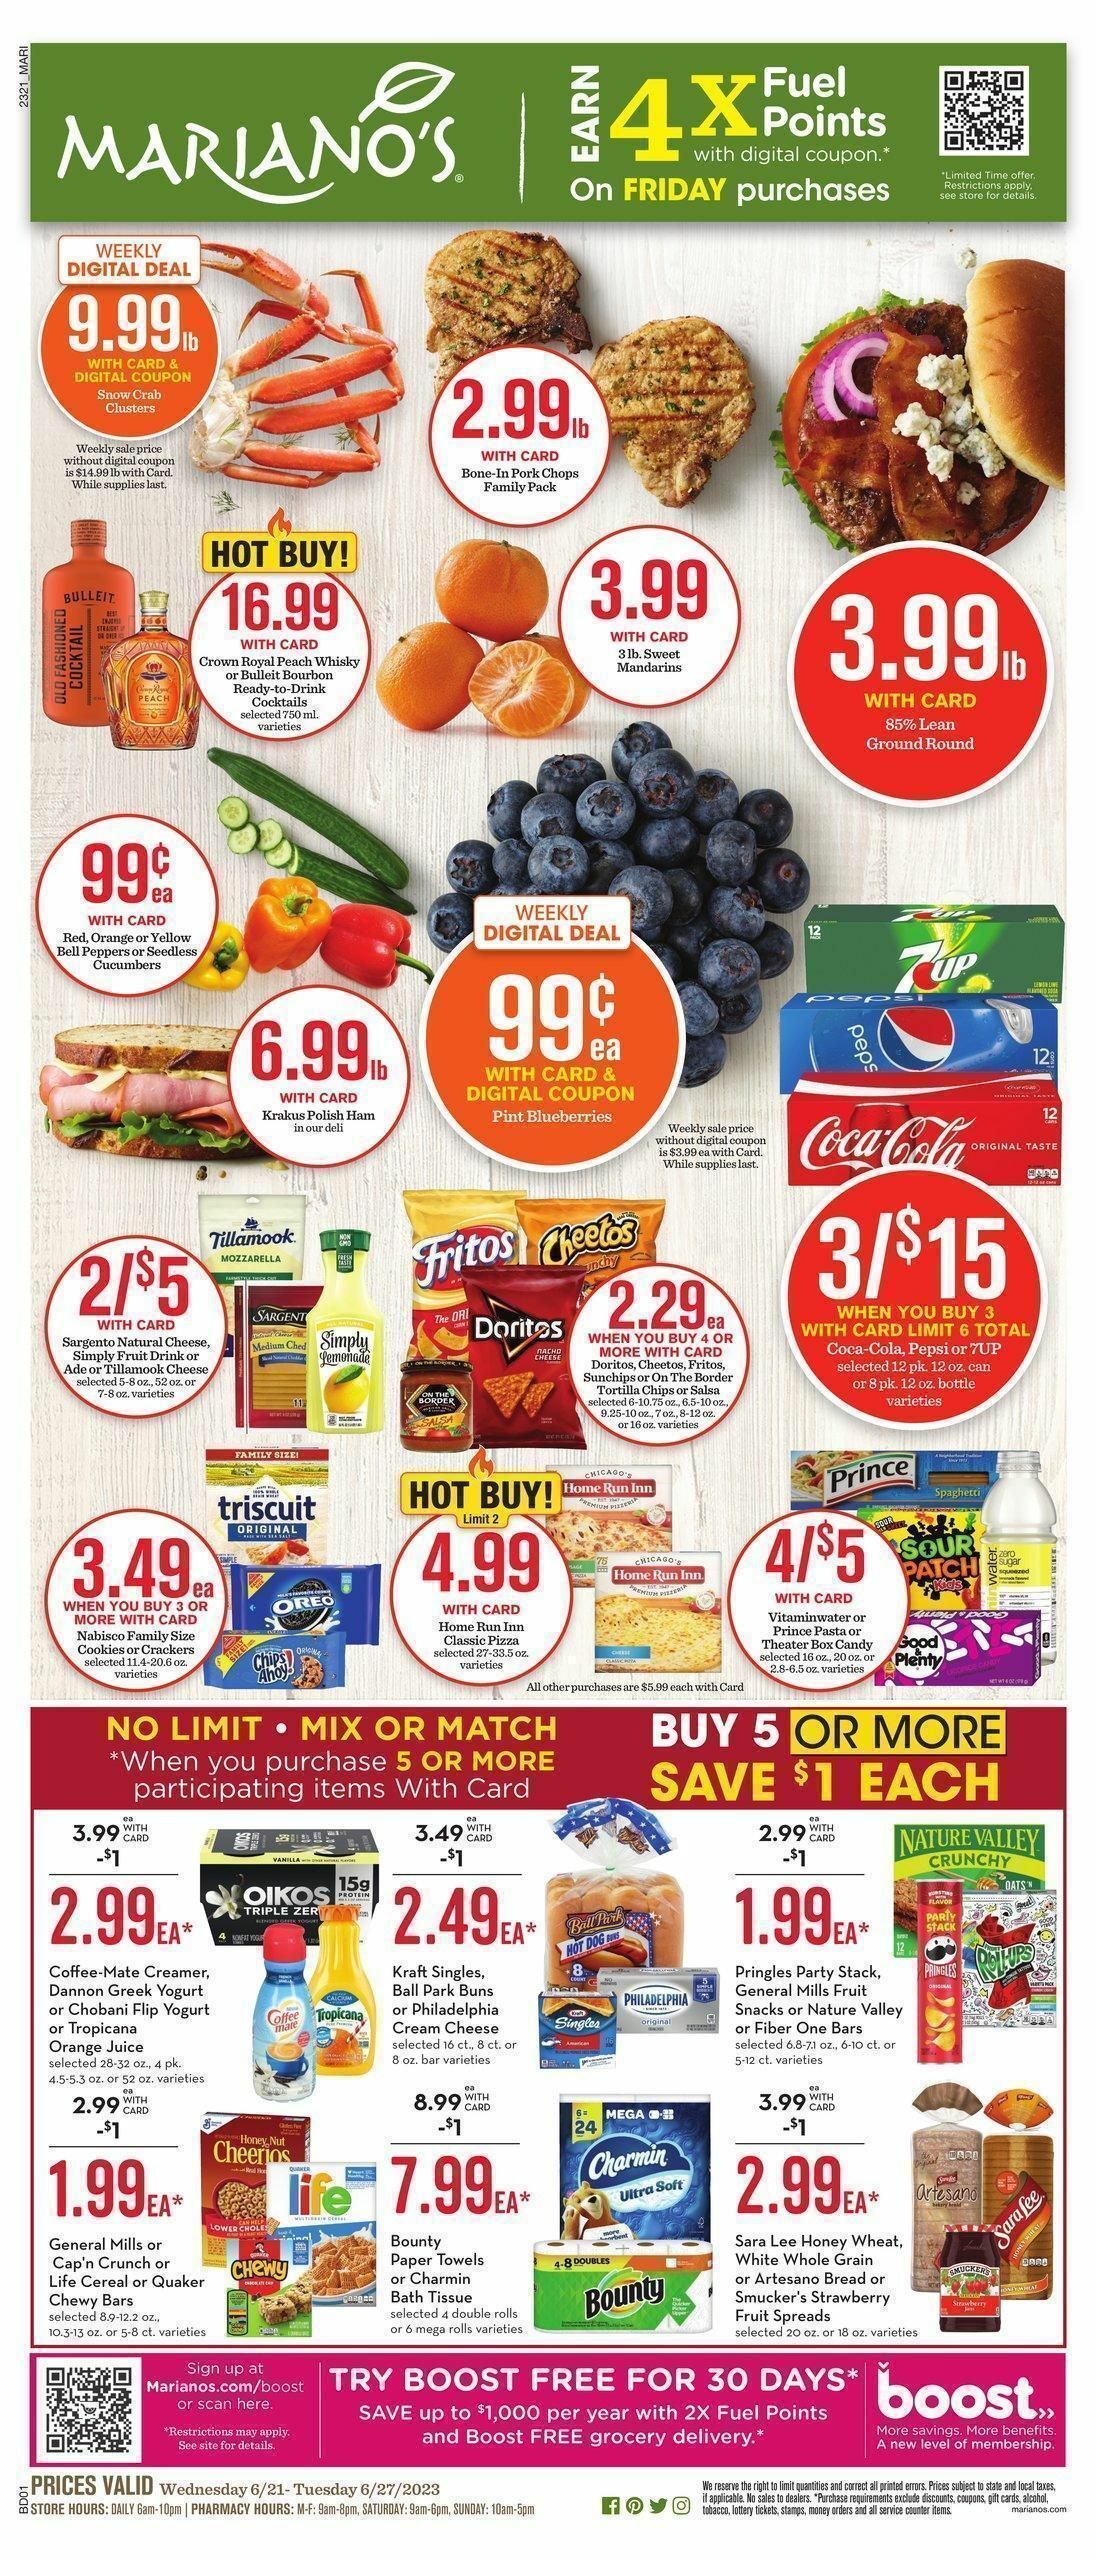 Mariano's Weekly Ad from June 21